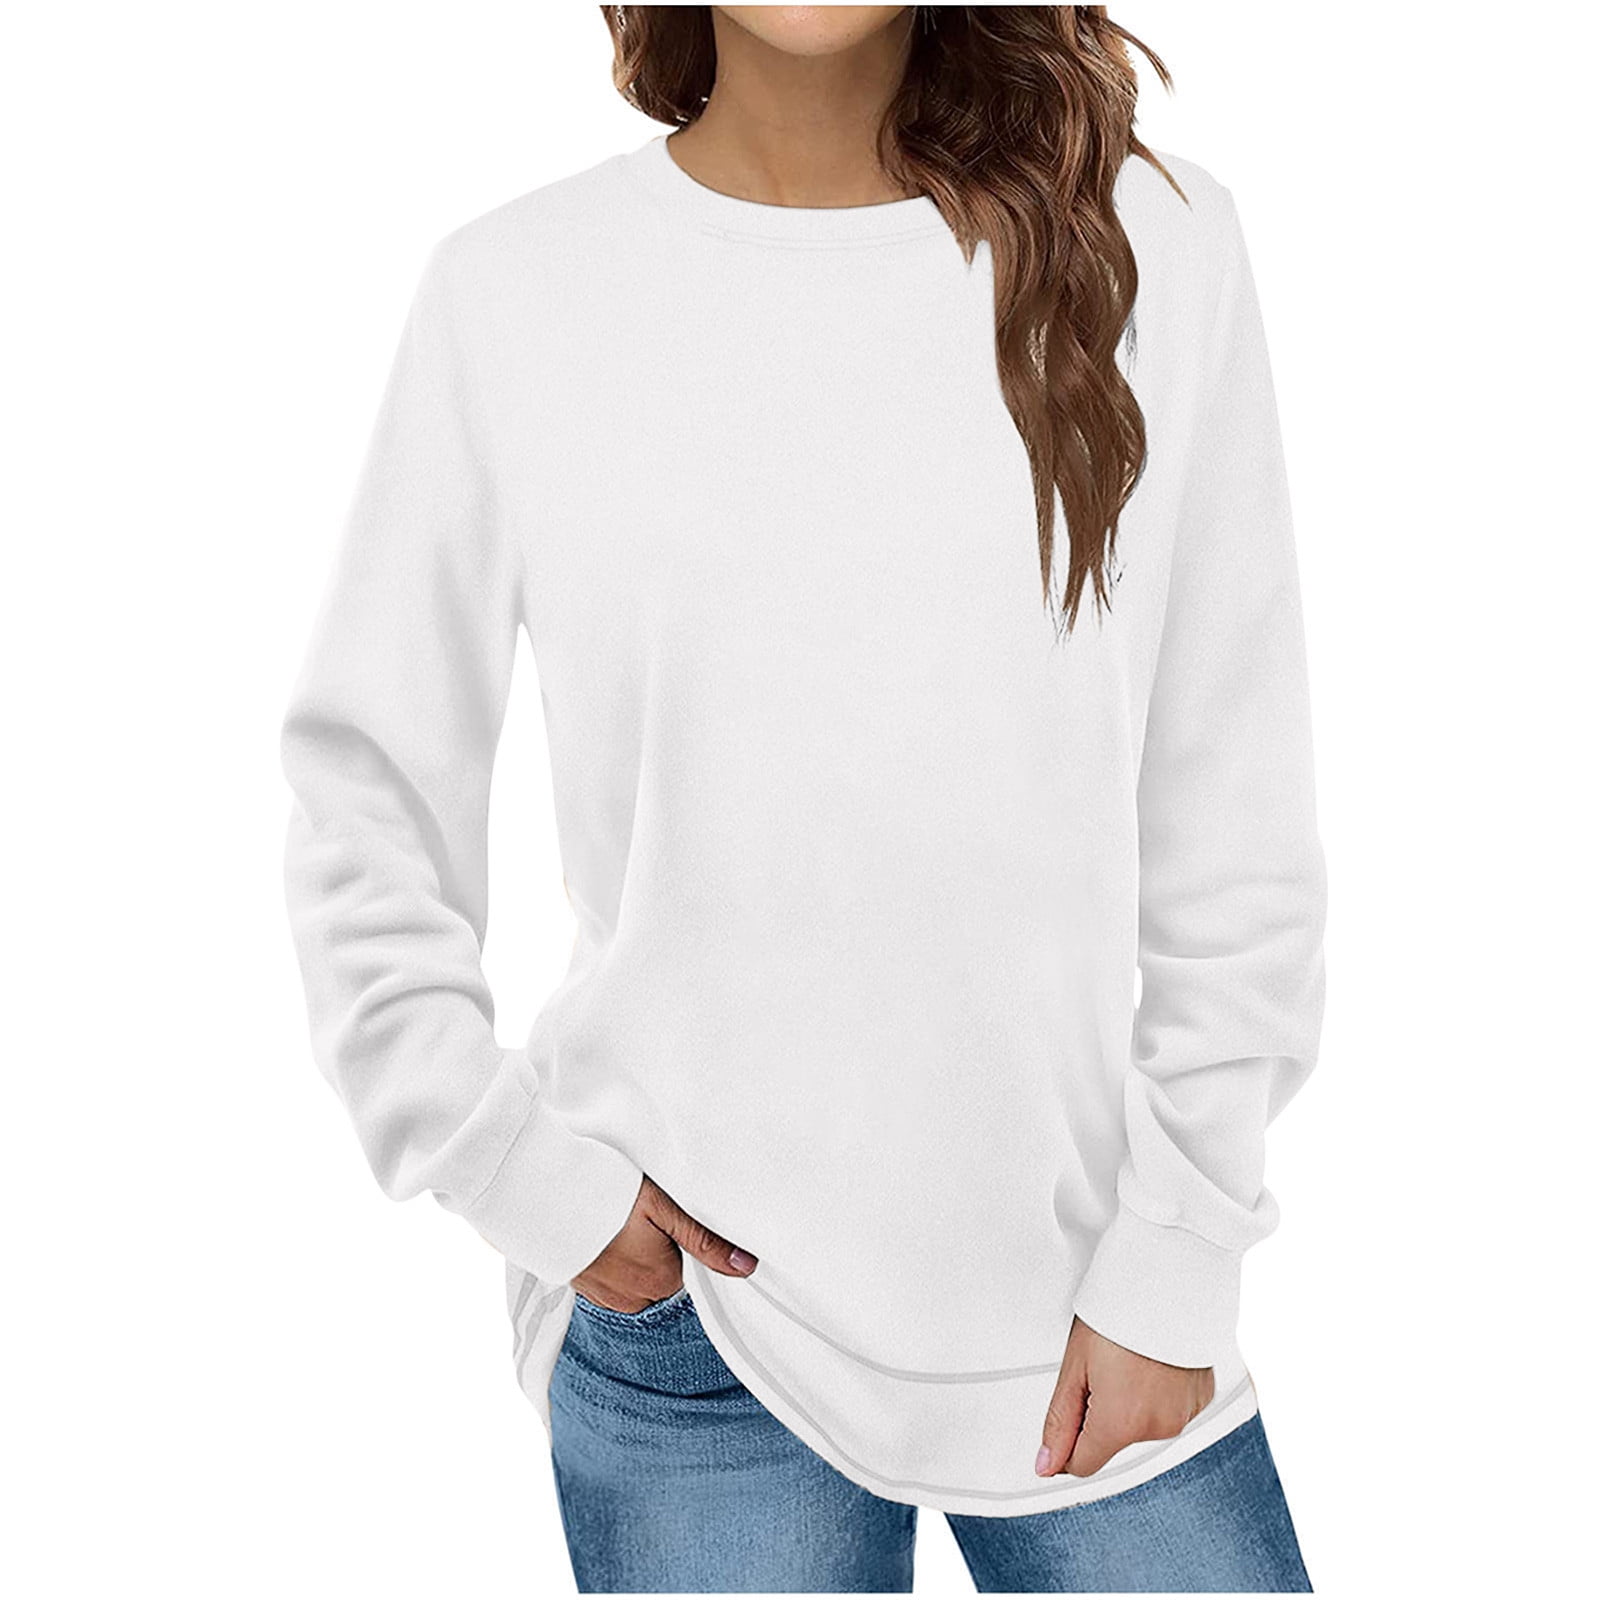 CaComMARK PI time and tru Women's Long Sleeve Tops Clearance Women's ...